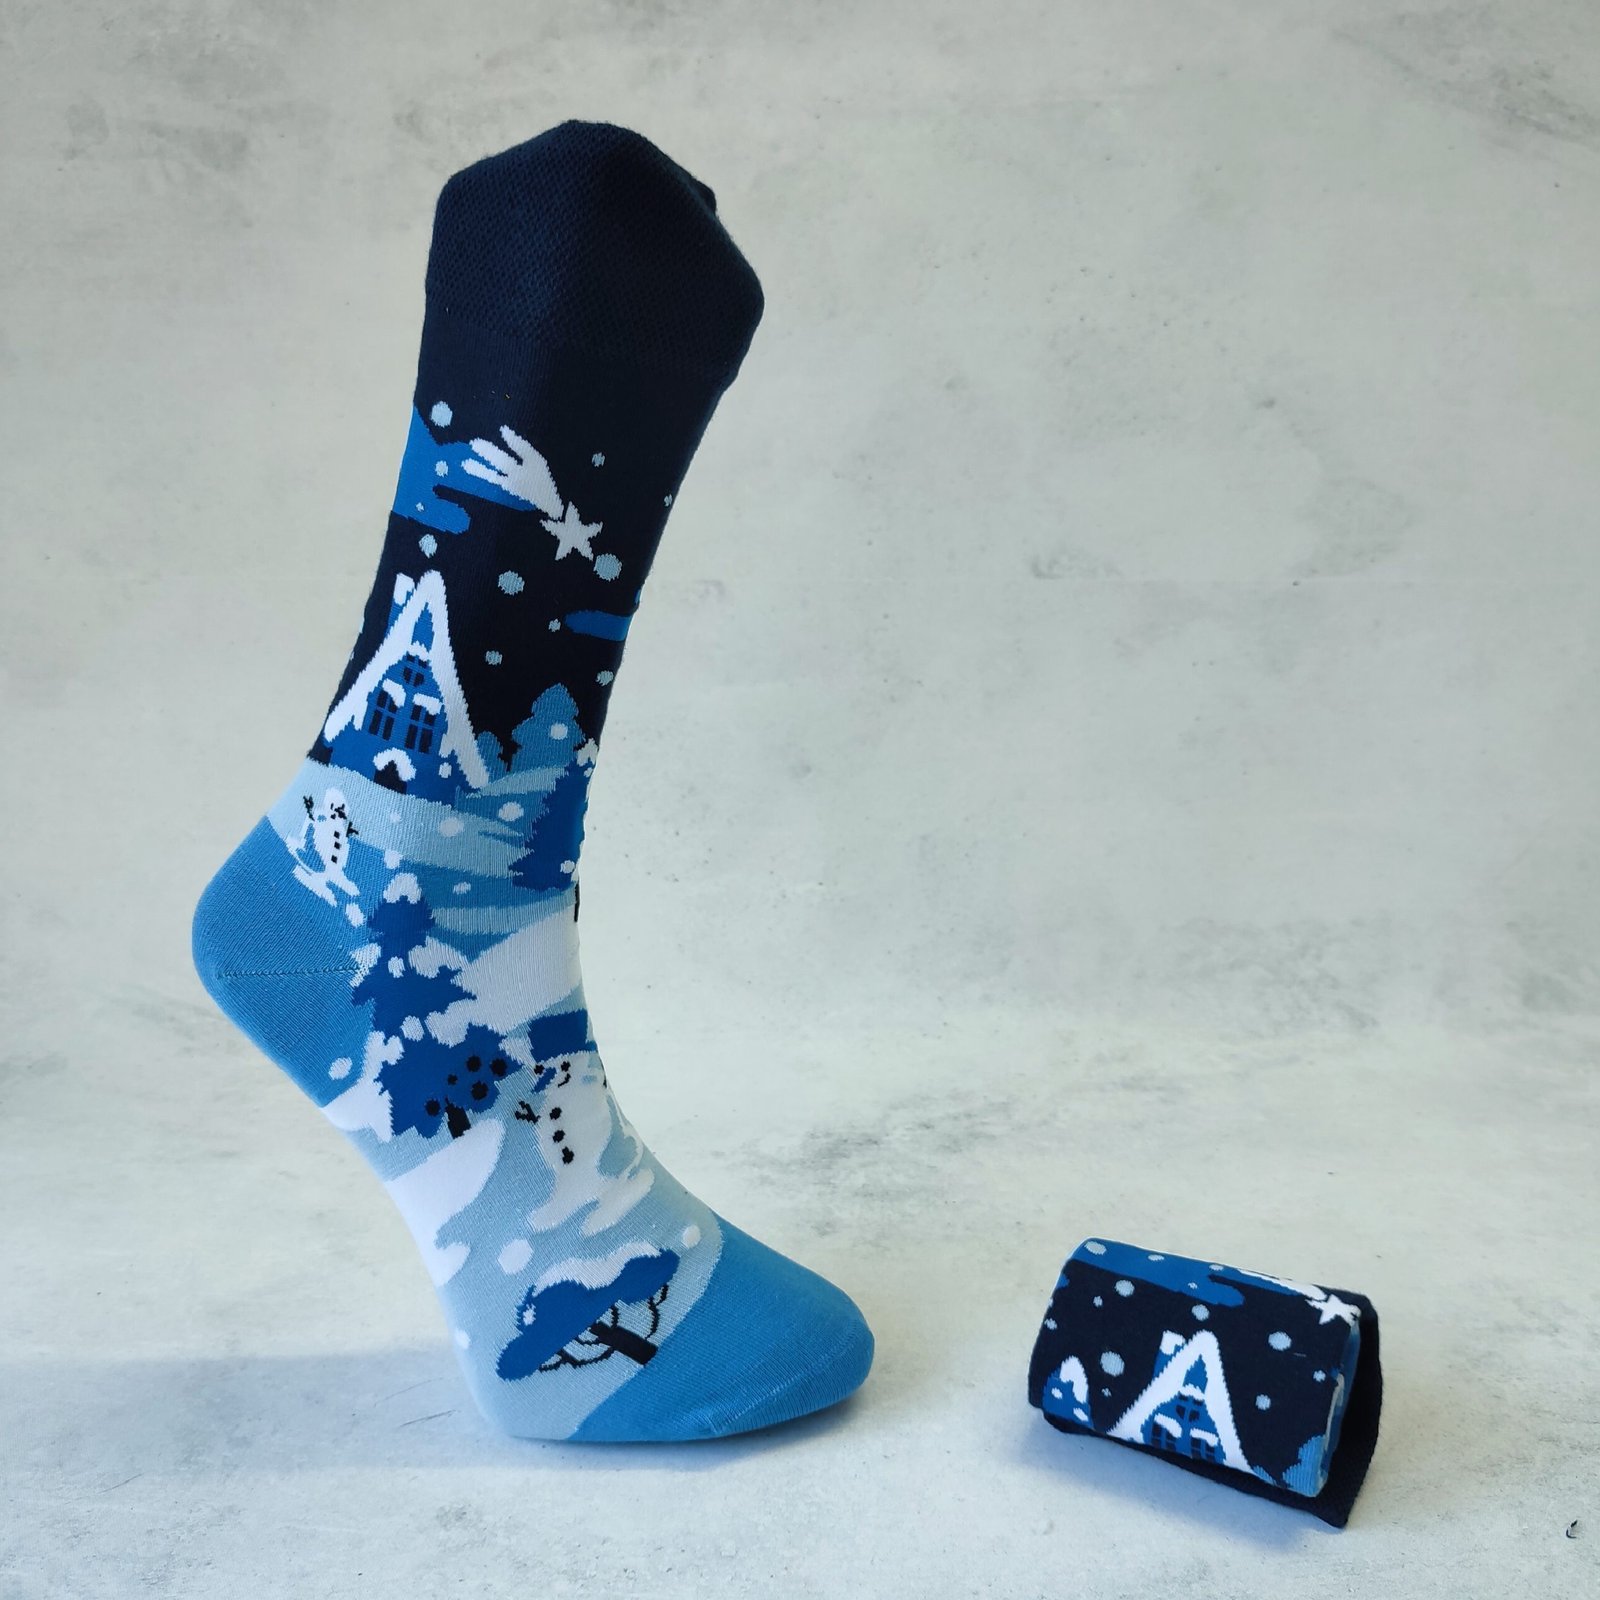 12 Pairs of Socks Crew Home Winter Patterned